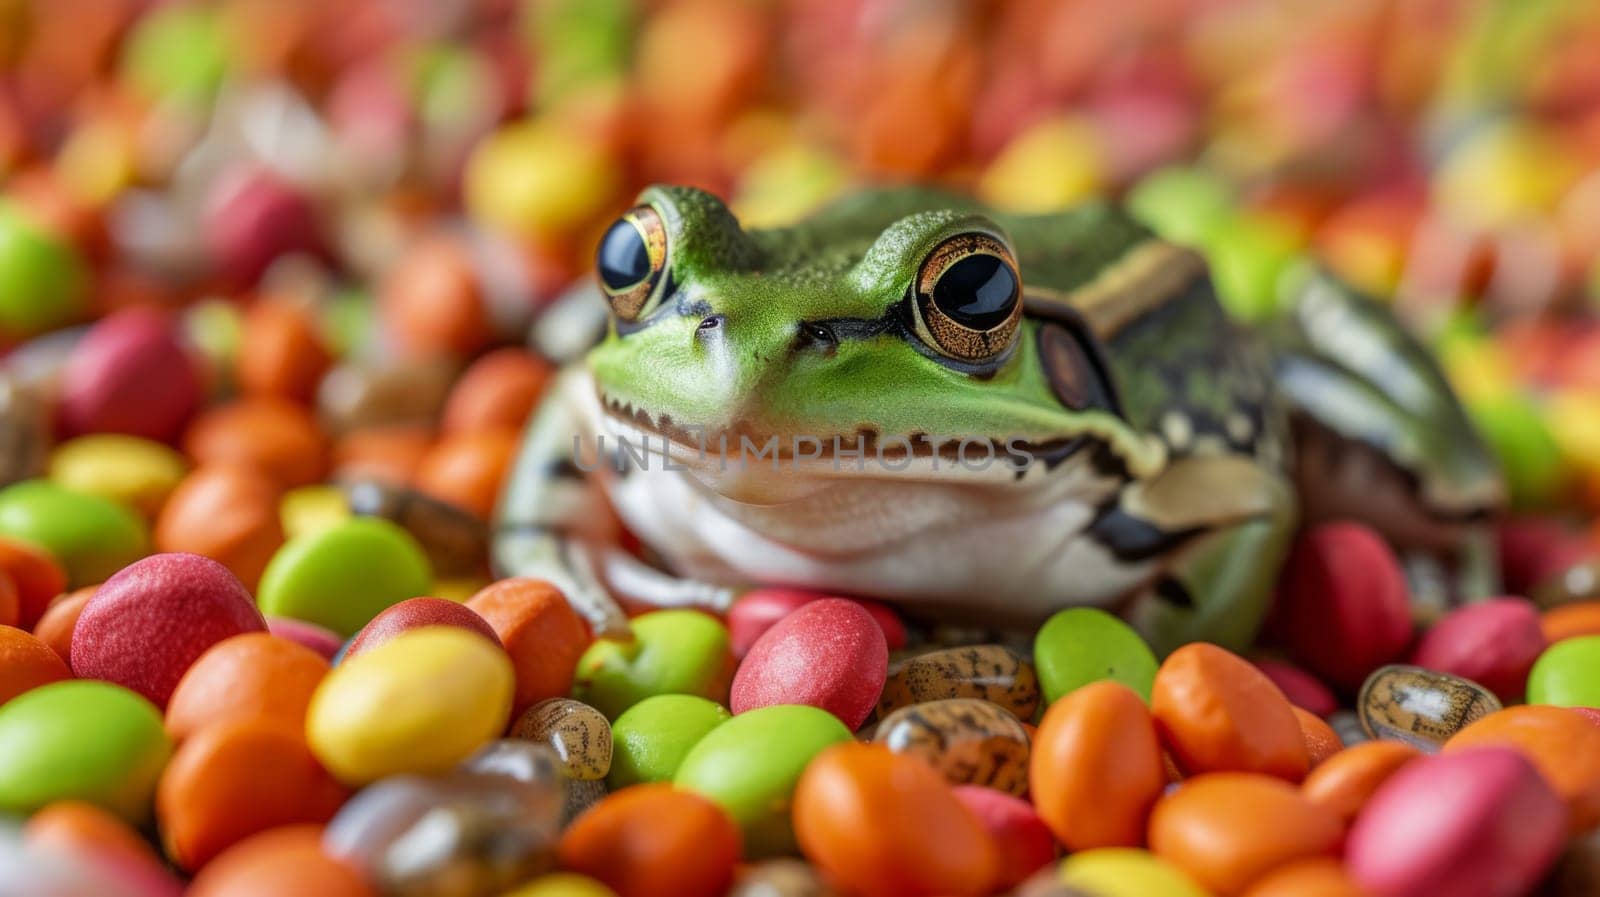 A frog sitting on a pile of candy beans and other candies, AI by starush